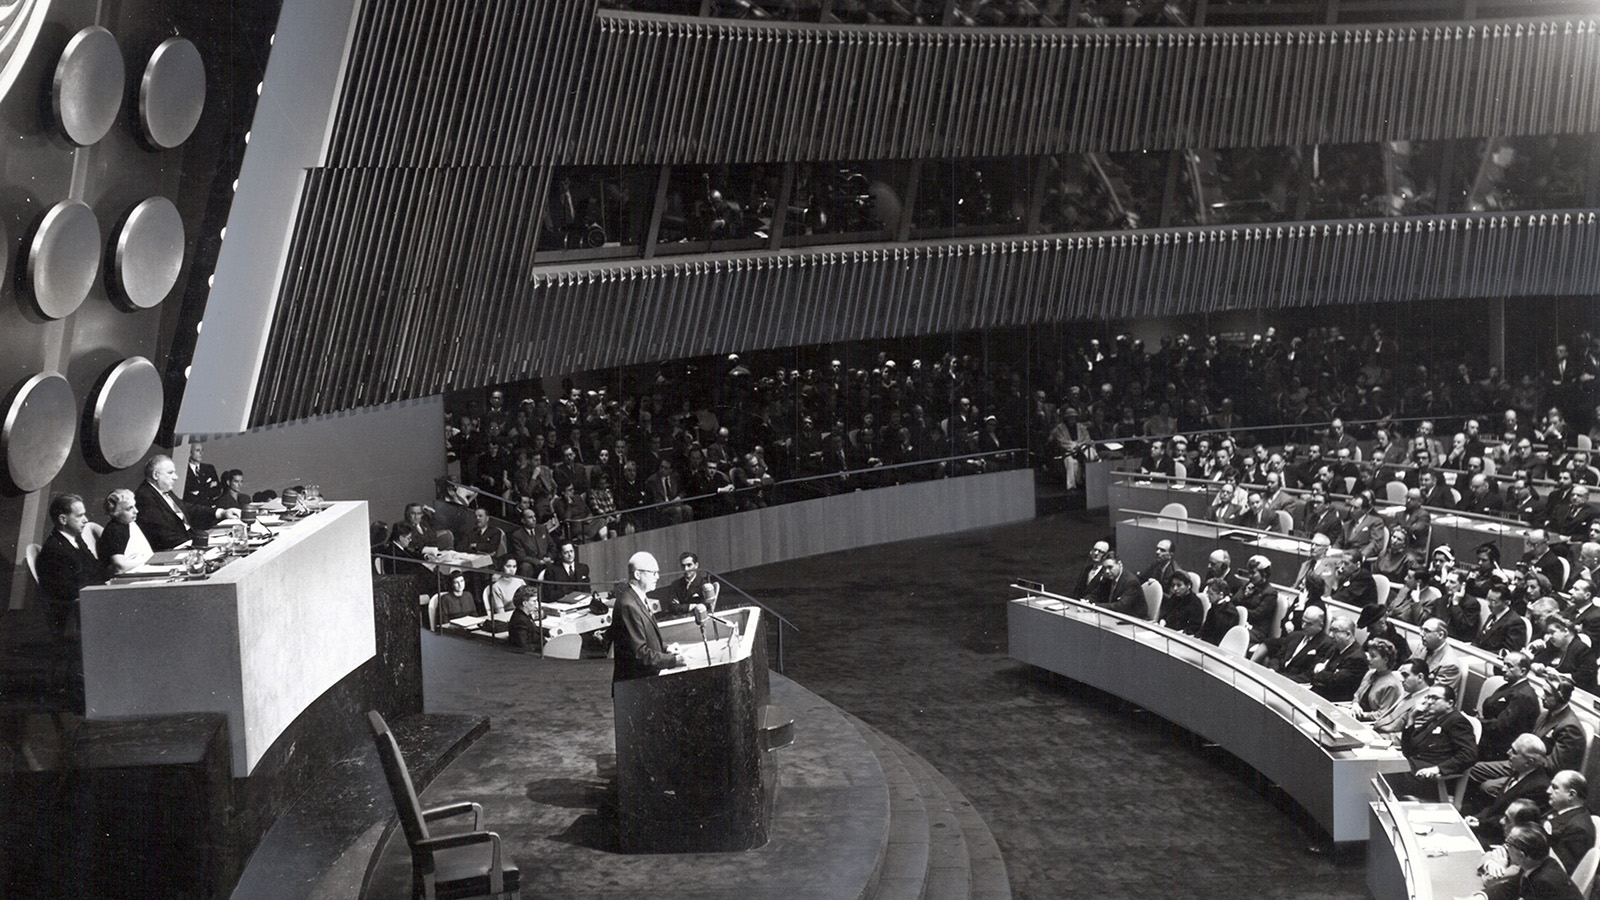 Eisenhower delivers his famous “Atoms for Peace” speech to the UN.